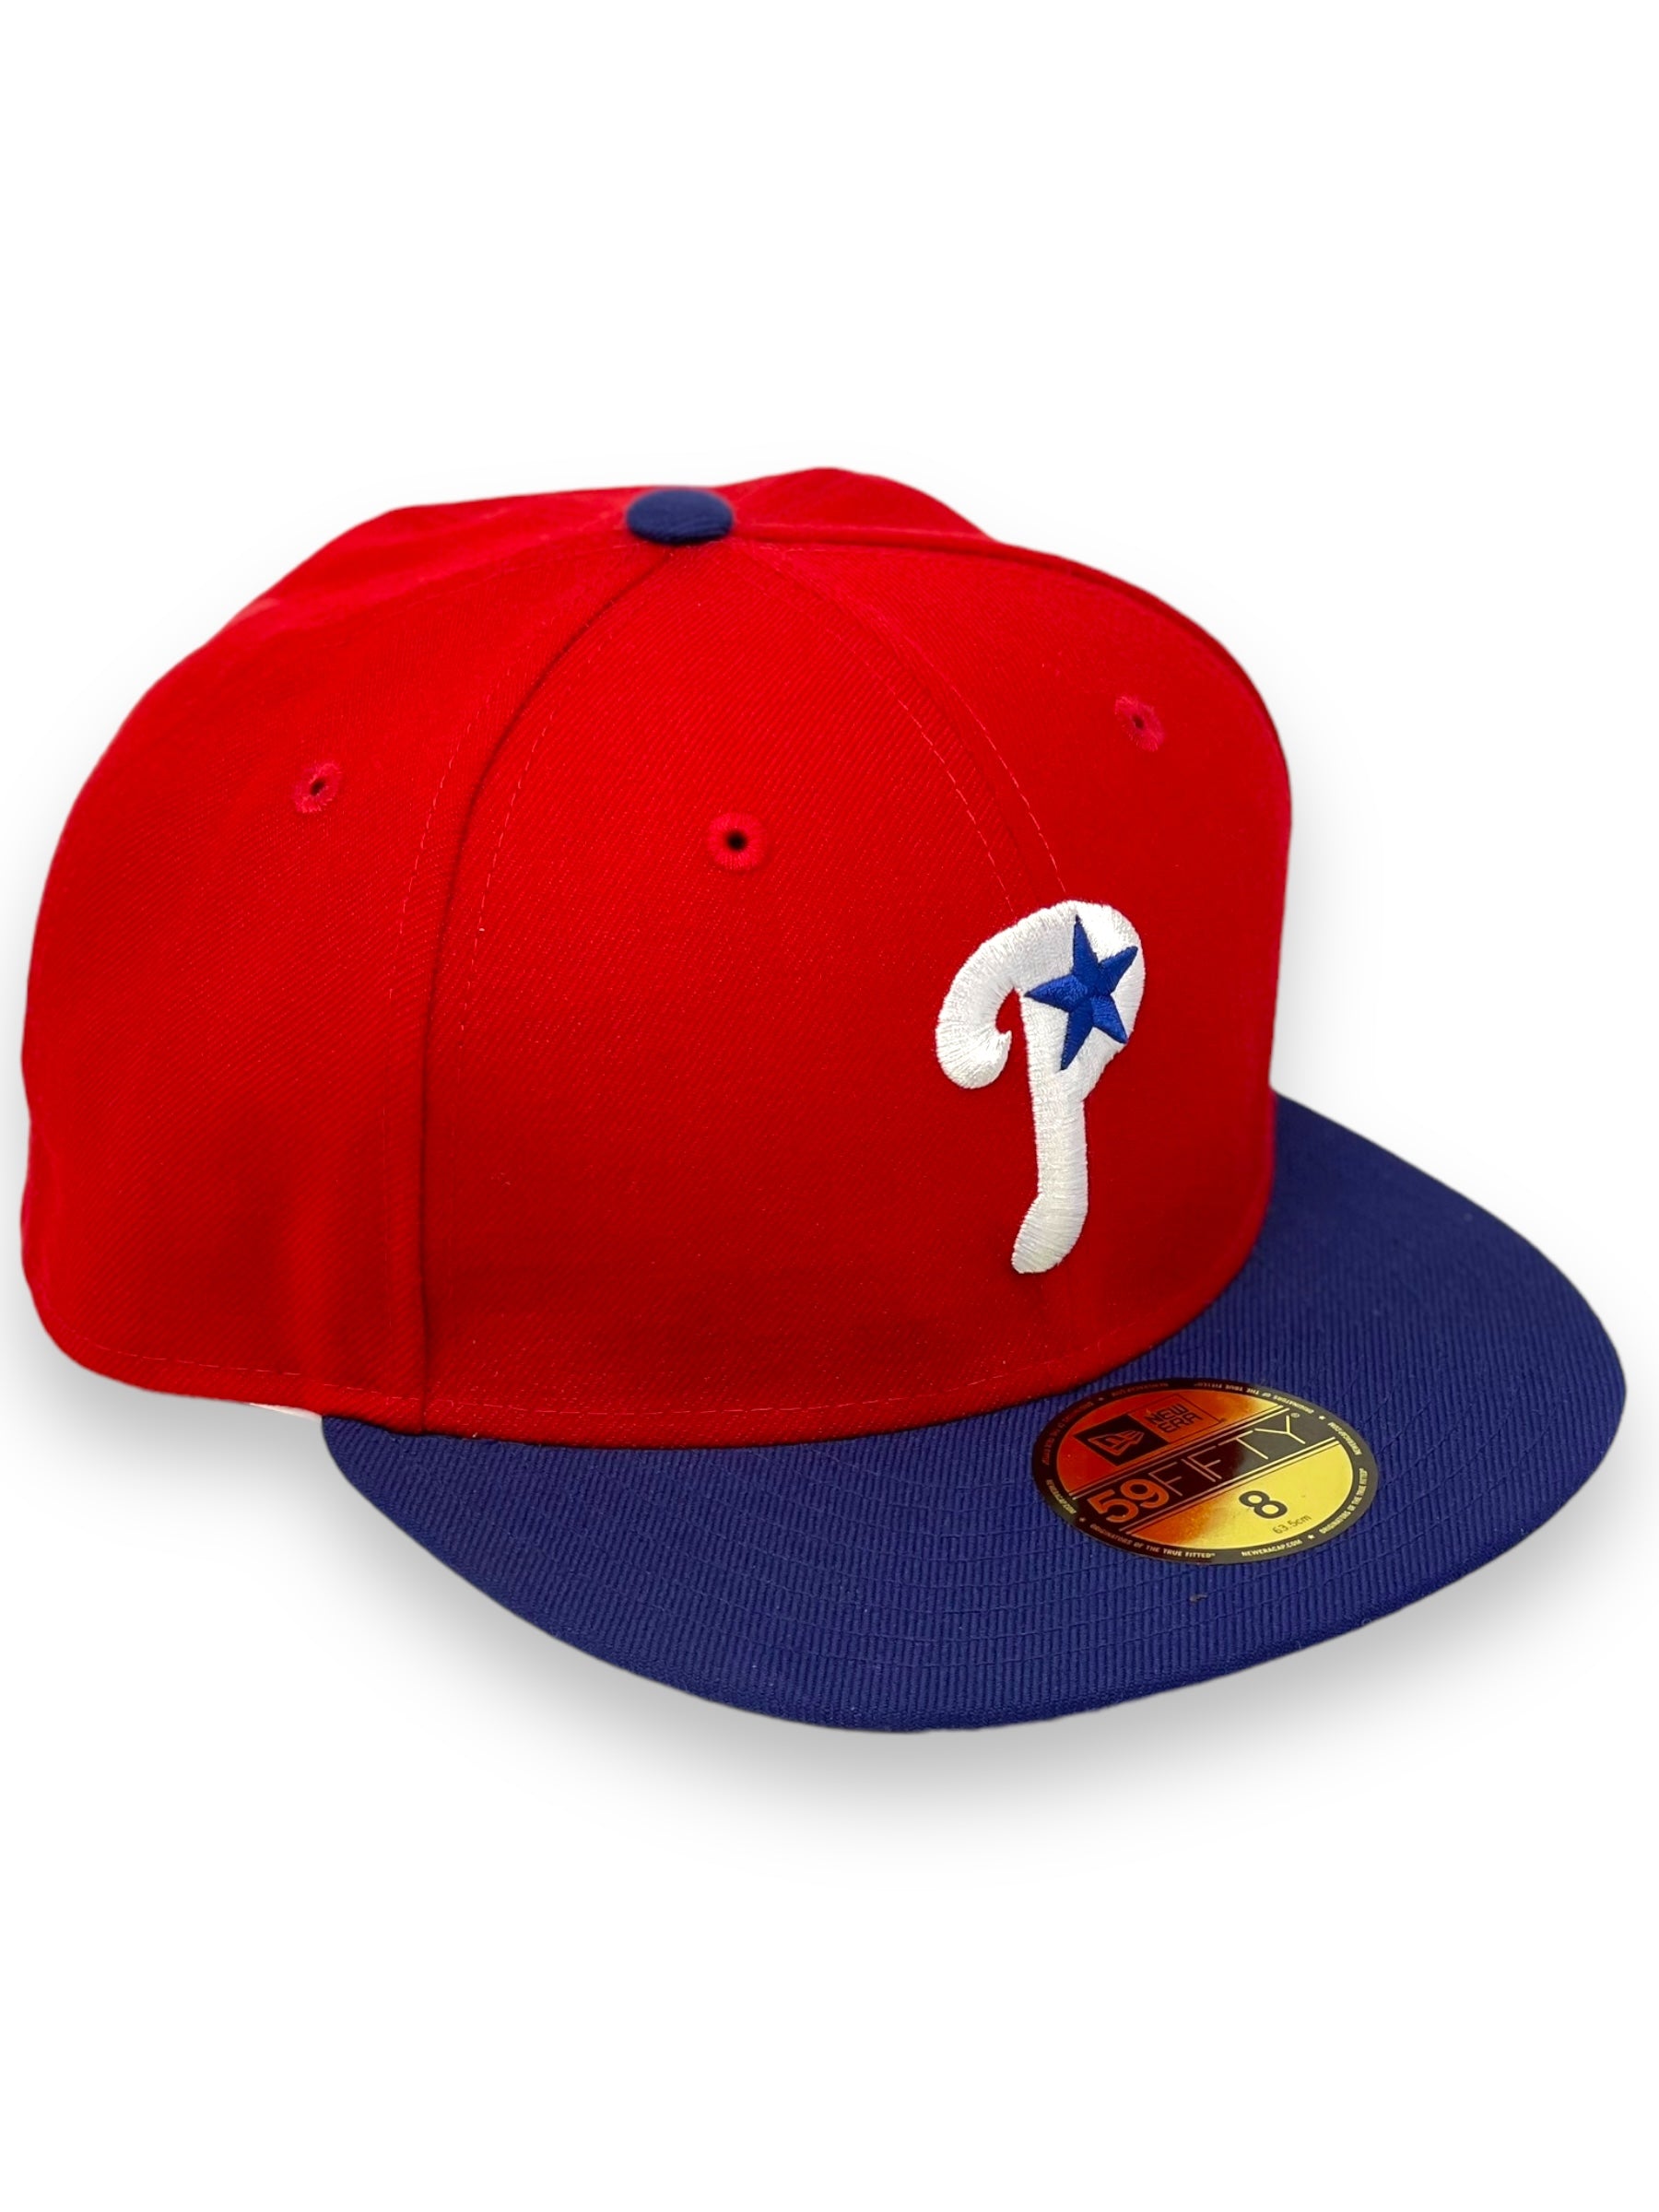 PHILADELPHIA PHILLIES "1999-2006 ALT" NEW ERA 59FIFTY FITTED (RED/ROYAL)